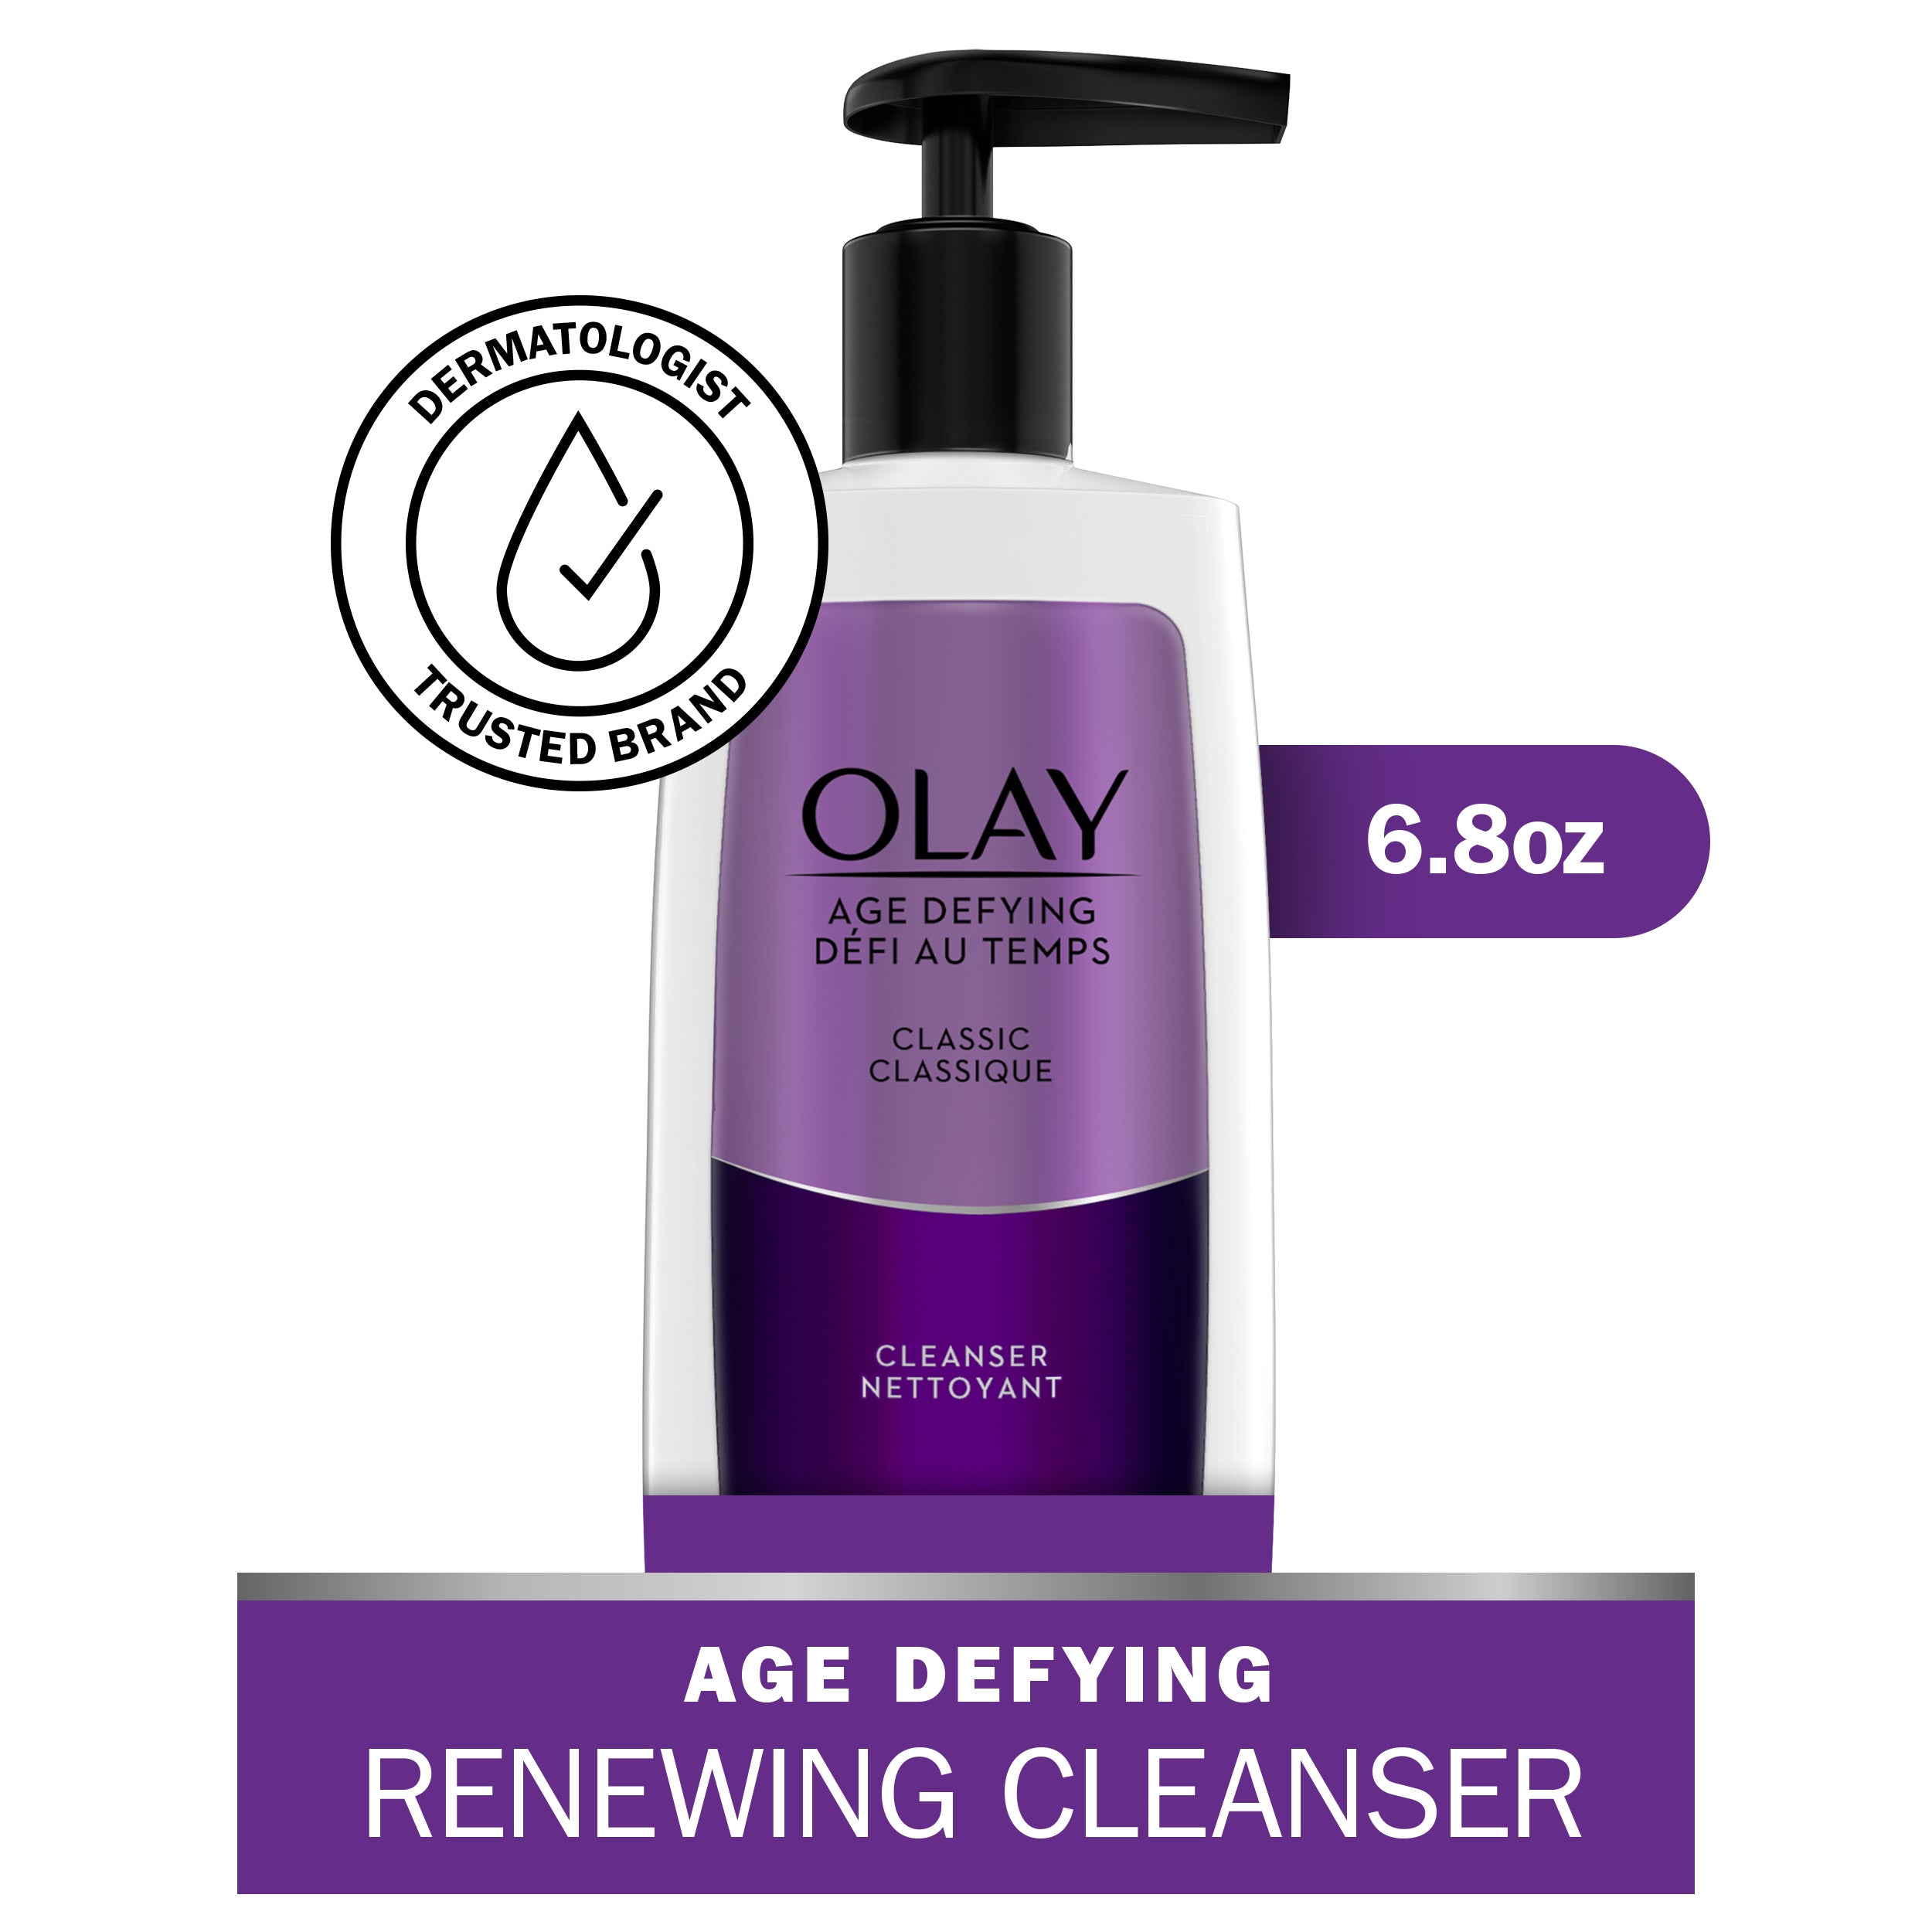 Olay Age Defying Classic Facial Cleanser for Dull Skin, 6.8 fl oz | MTTS322